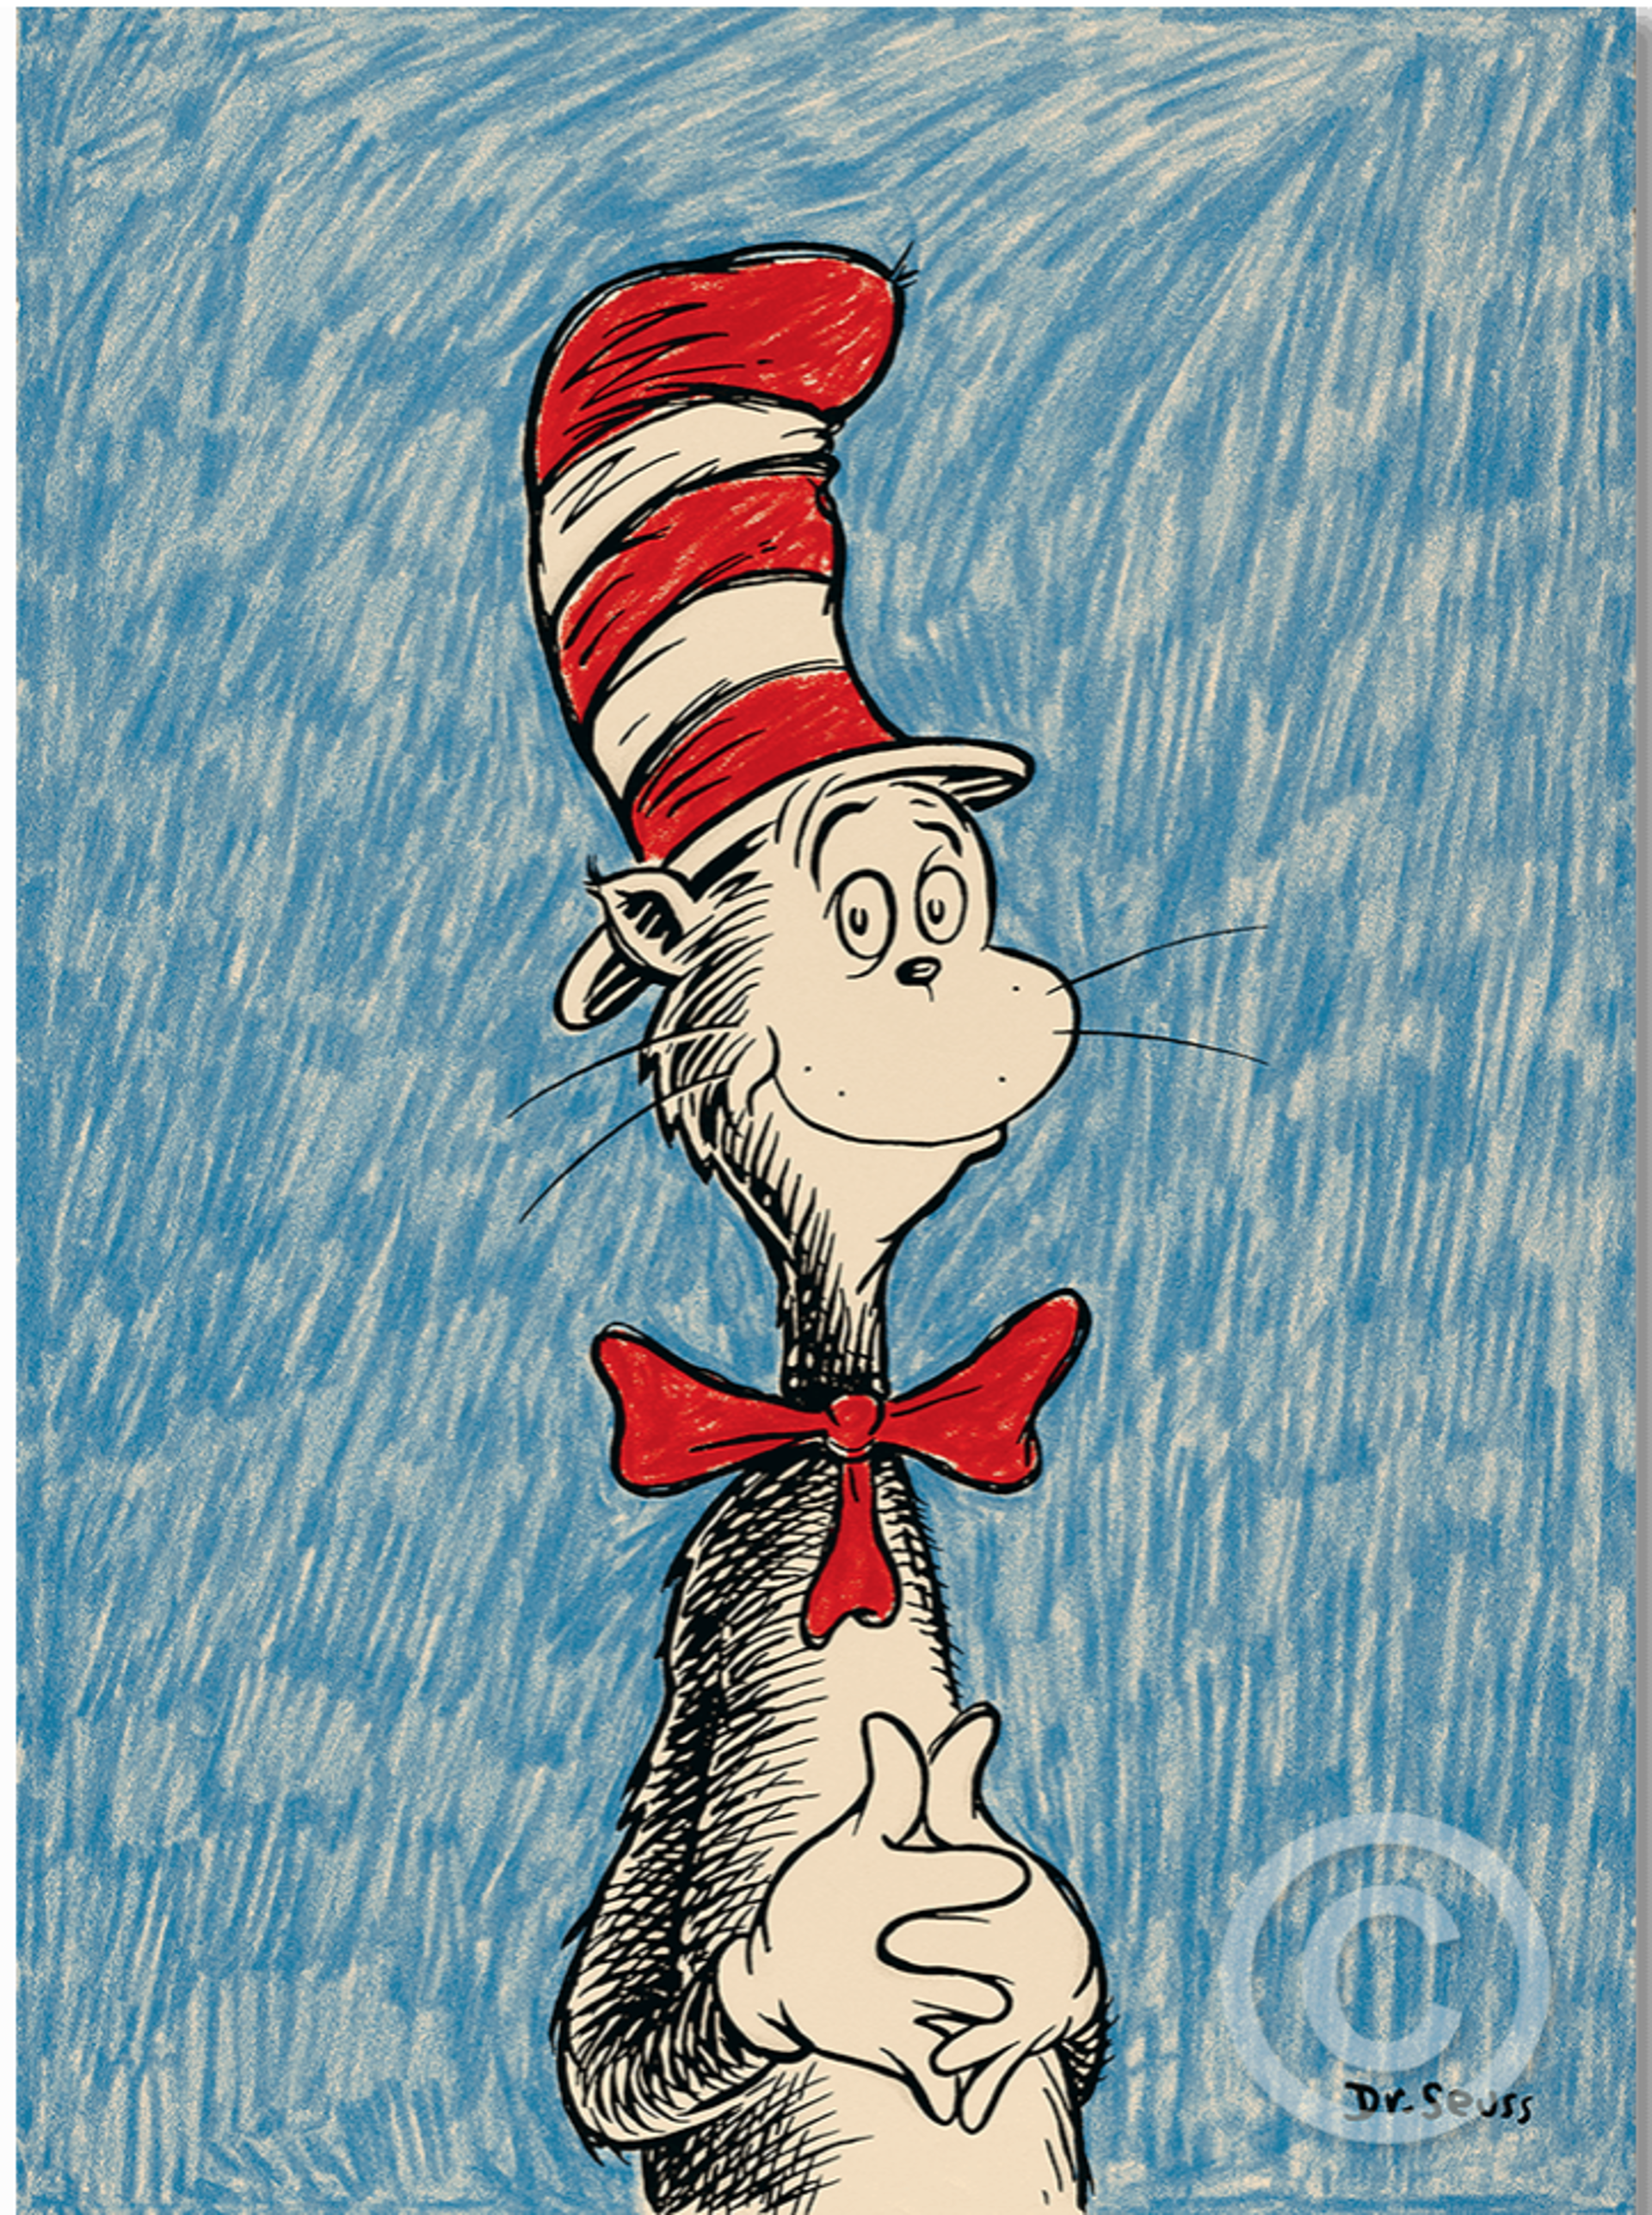 THE CAT’S DEBUT LEFT by Dr. Seuss